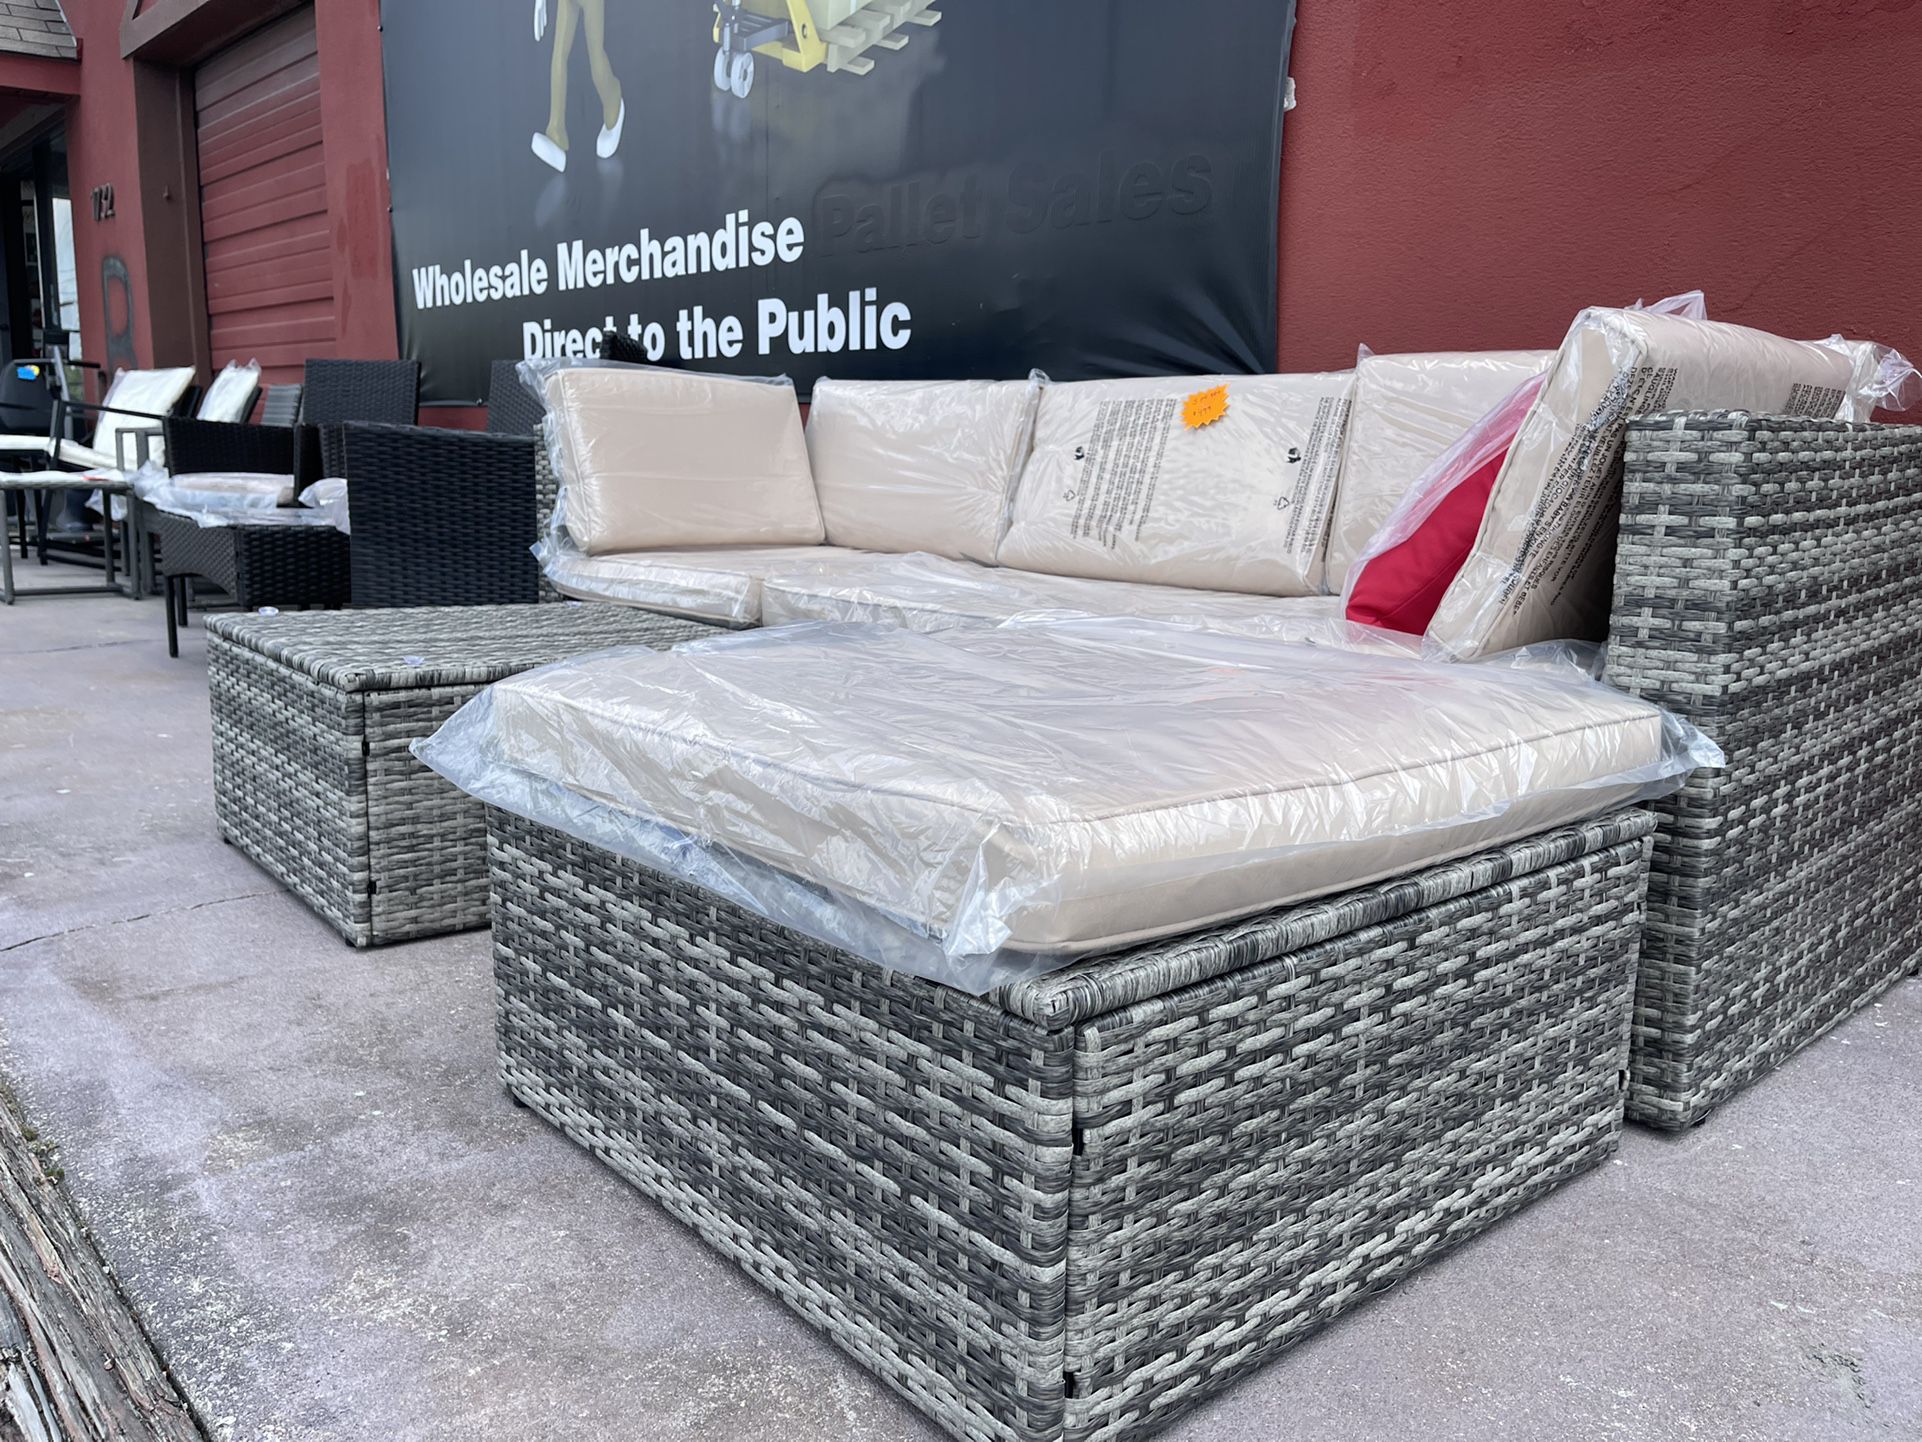 Sectional Outdoor Patio Set New Fully Assembled With Cushions 